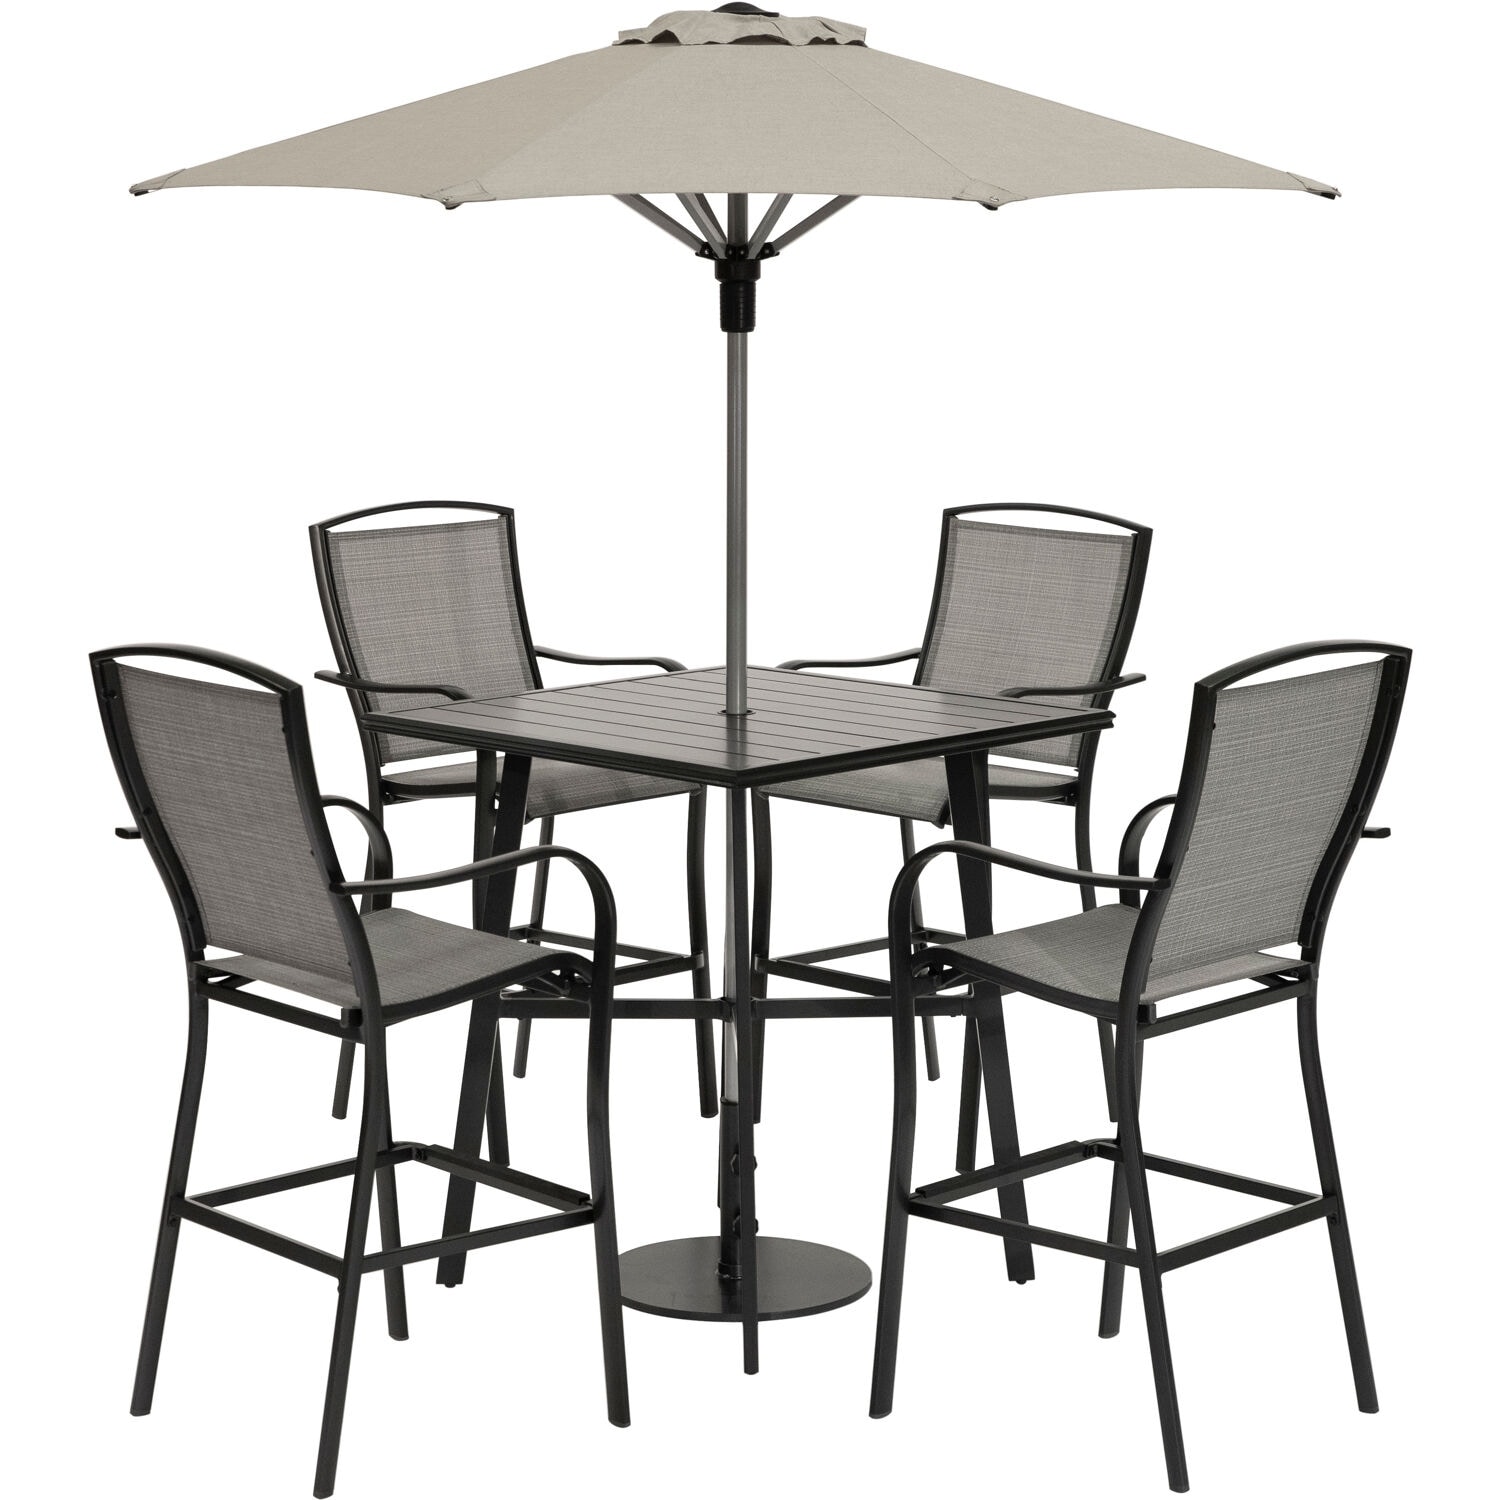 Hanover Foxhill 5-piece Commercial-grade Counter-height Dining Set With 4 Sling Chairs And 42-in. Slat  7.5-ft. Umbrella